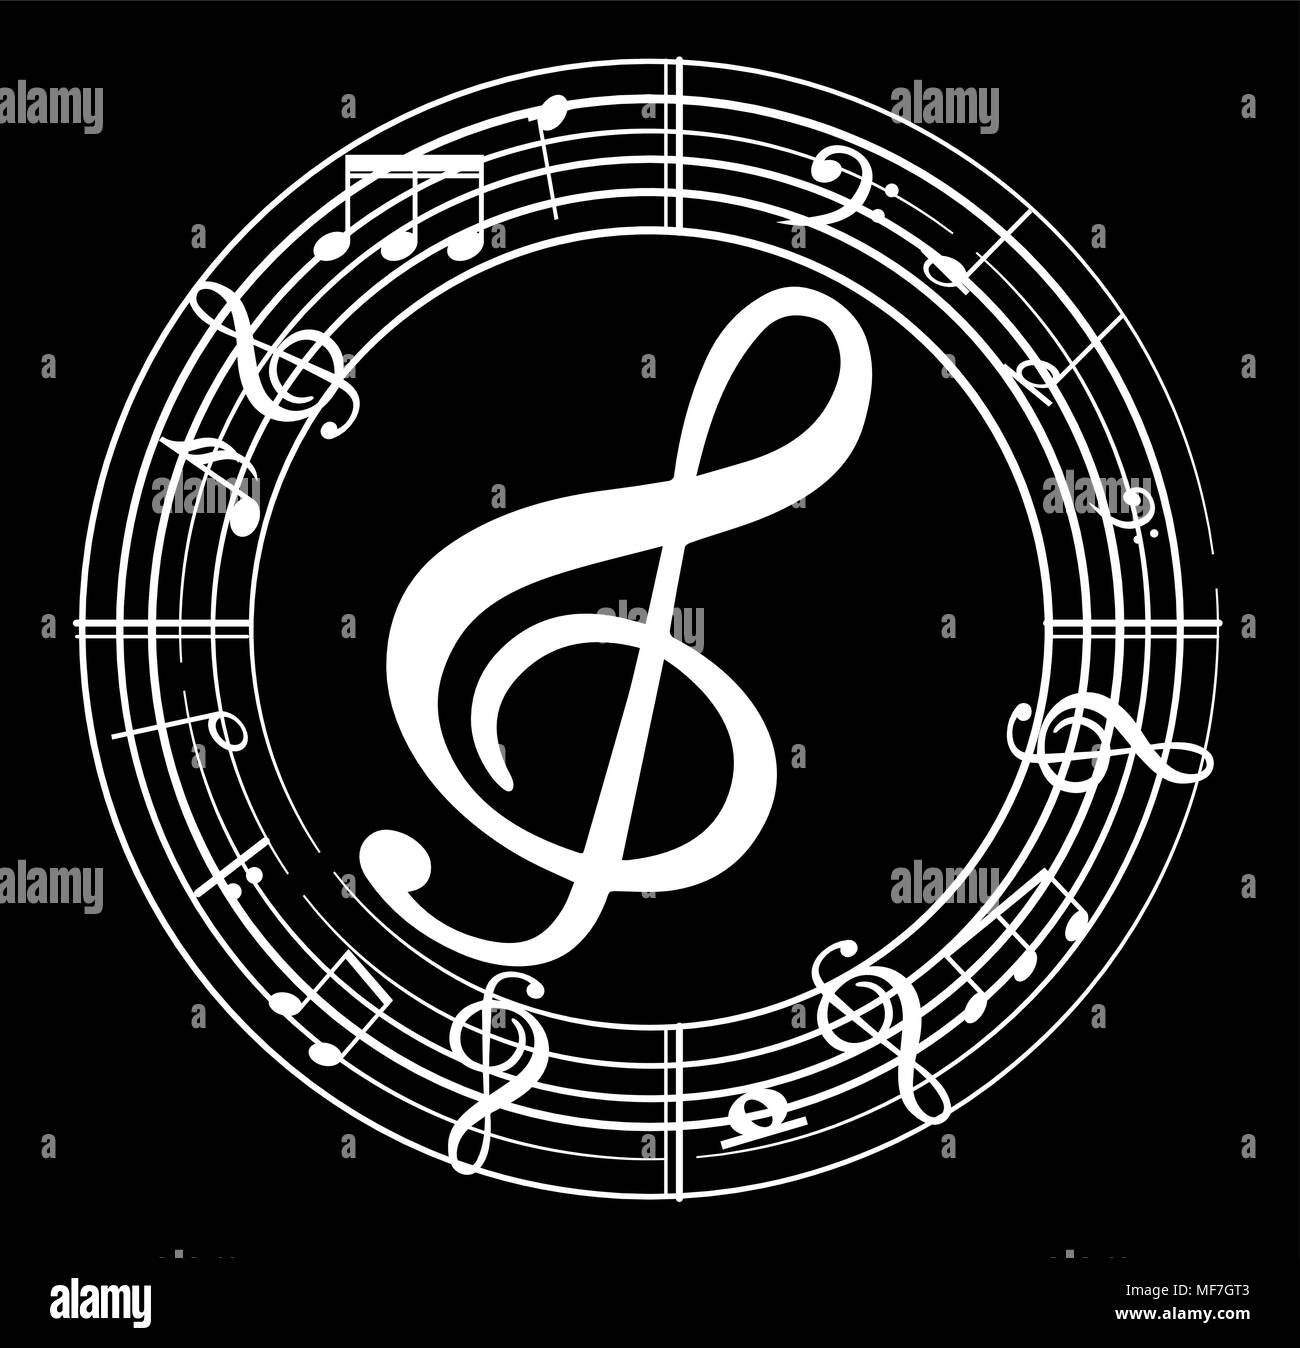 Music note background with different music symbols Stock Vector ...